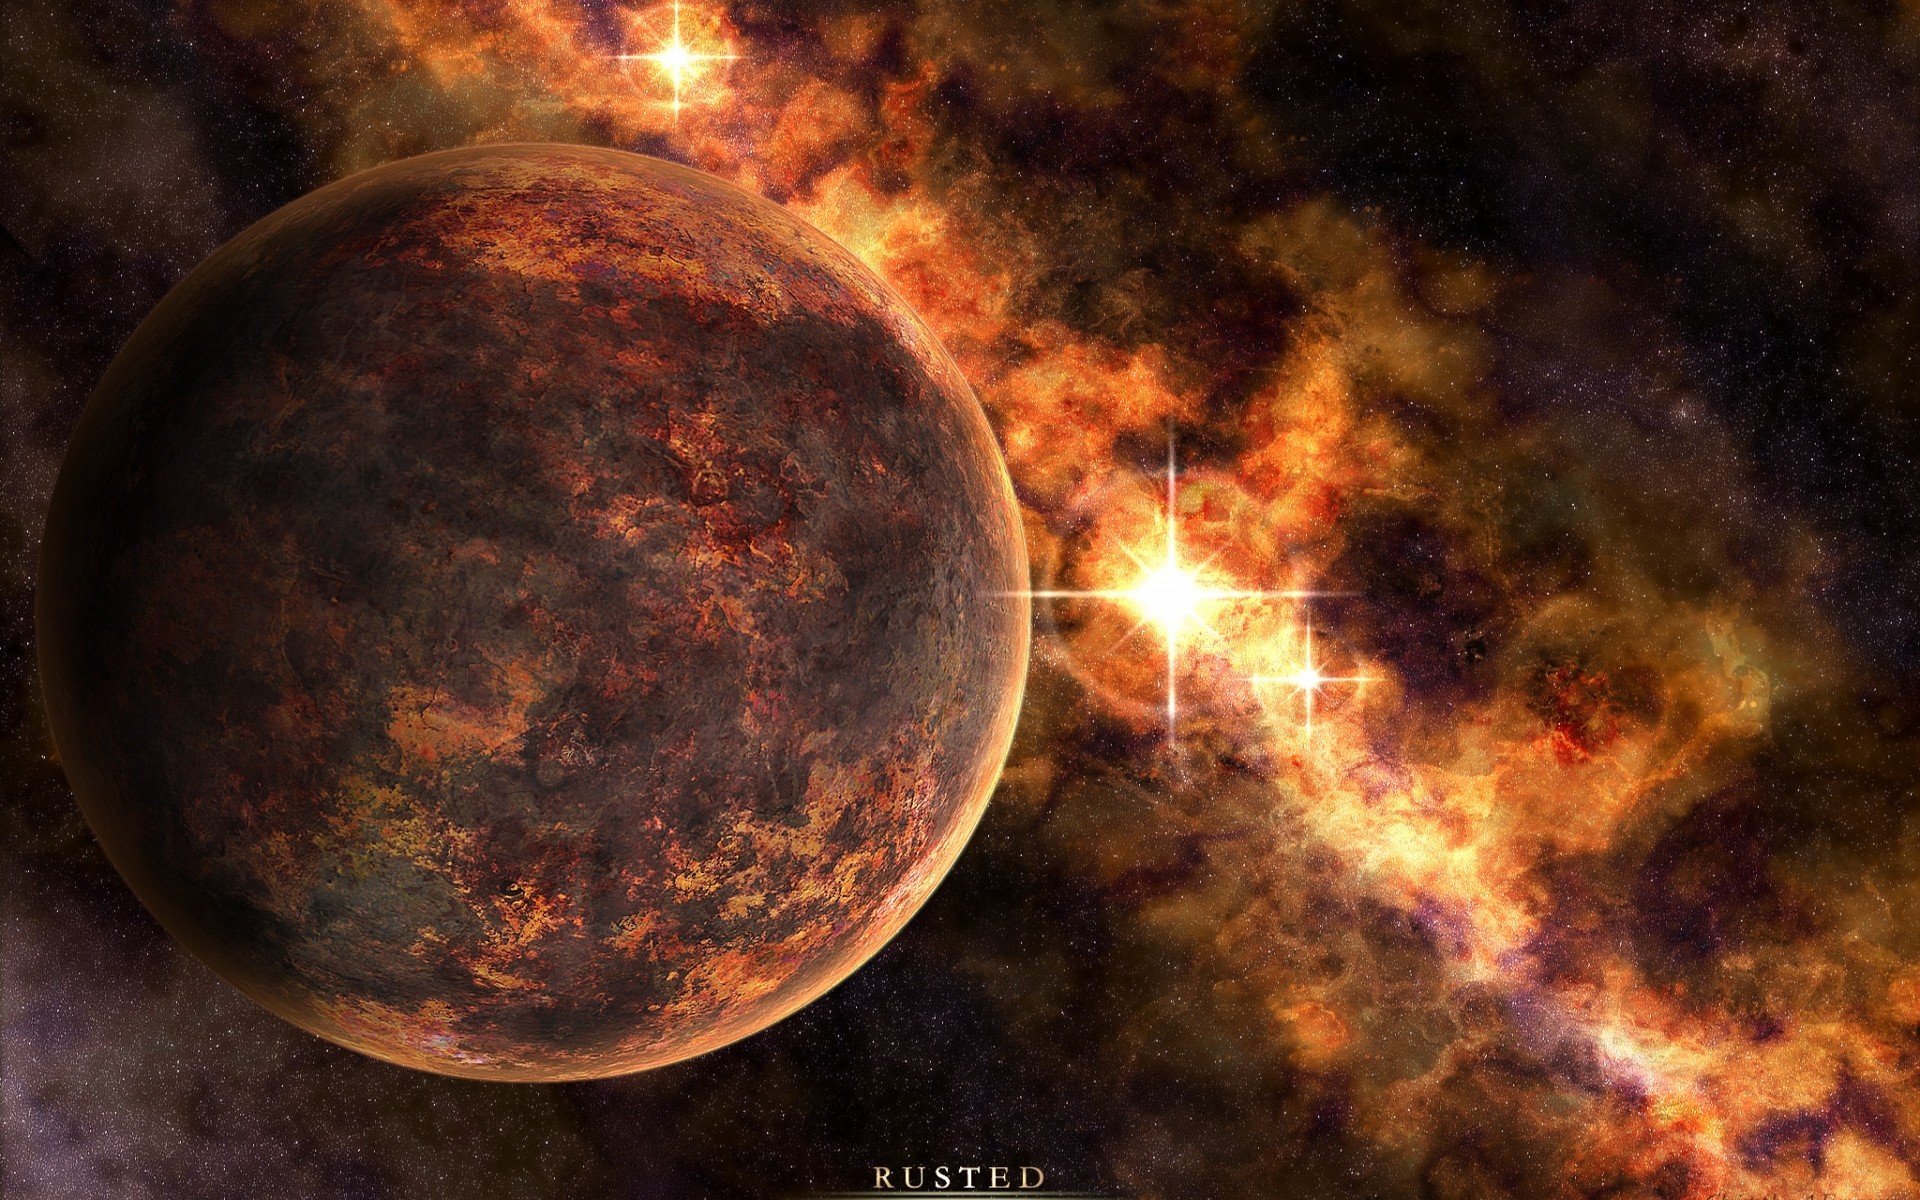 outer, Space, Stars, Planets Wallpaper